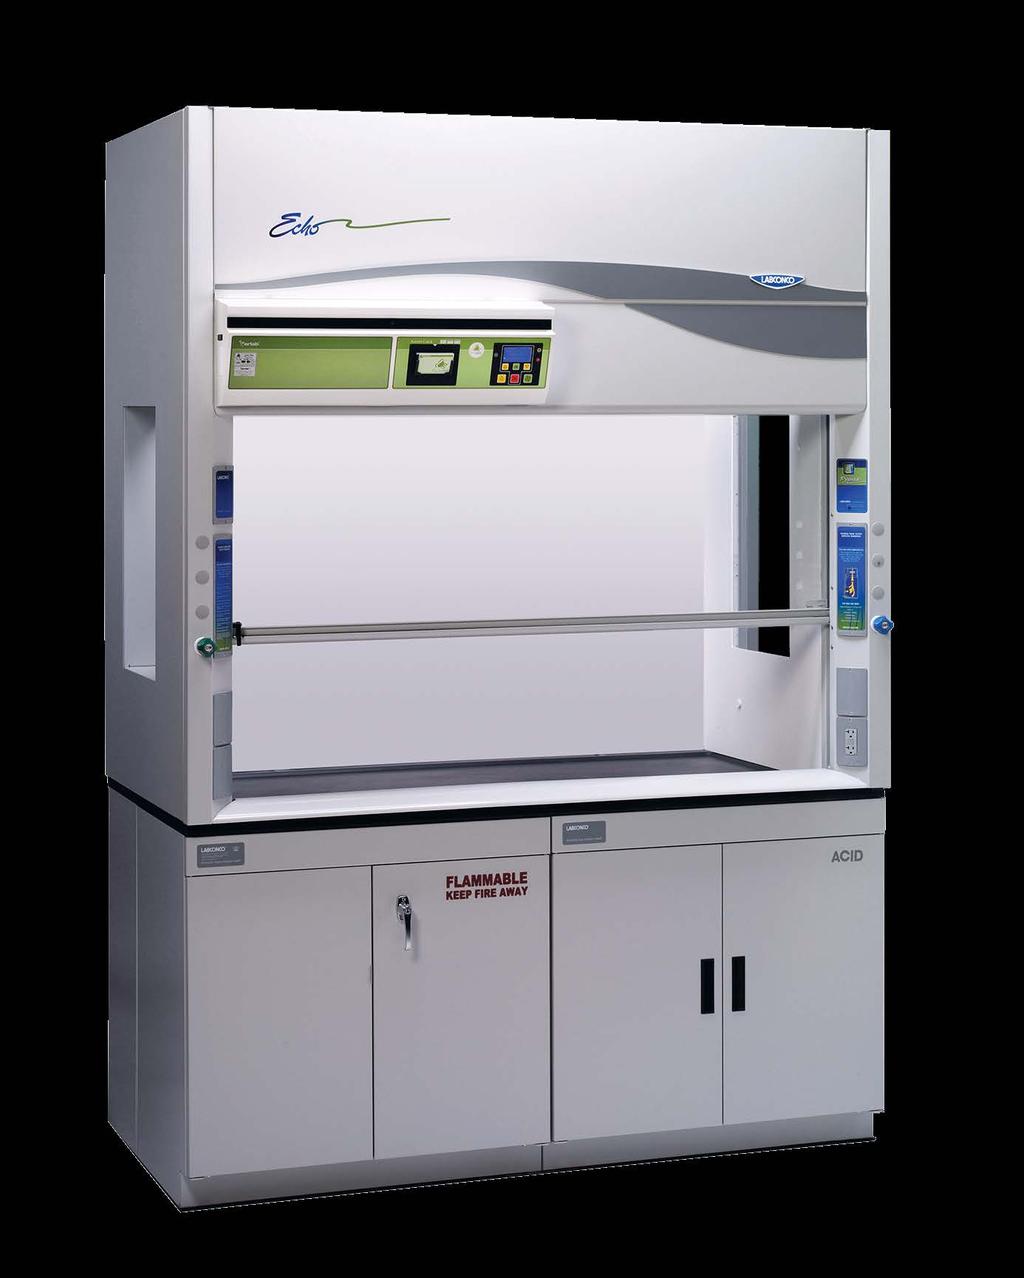 ASHRAE 110-1995 is a three part test: face velocity profile test, smoke generation test, and tracer gas test. FACE VELOCITY PROFILE TEST: Measures the speed of the air movement within a fume hood.